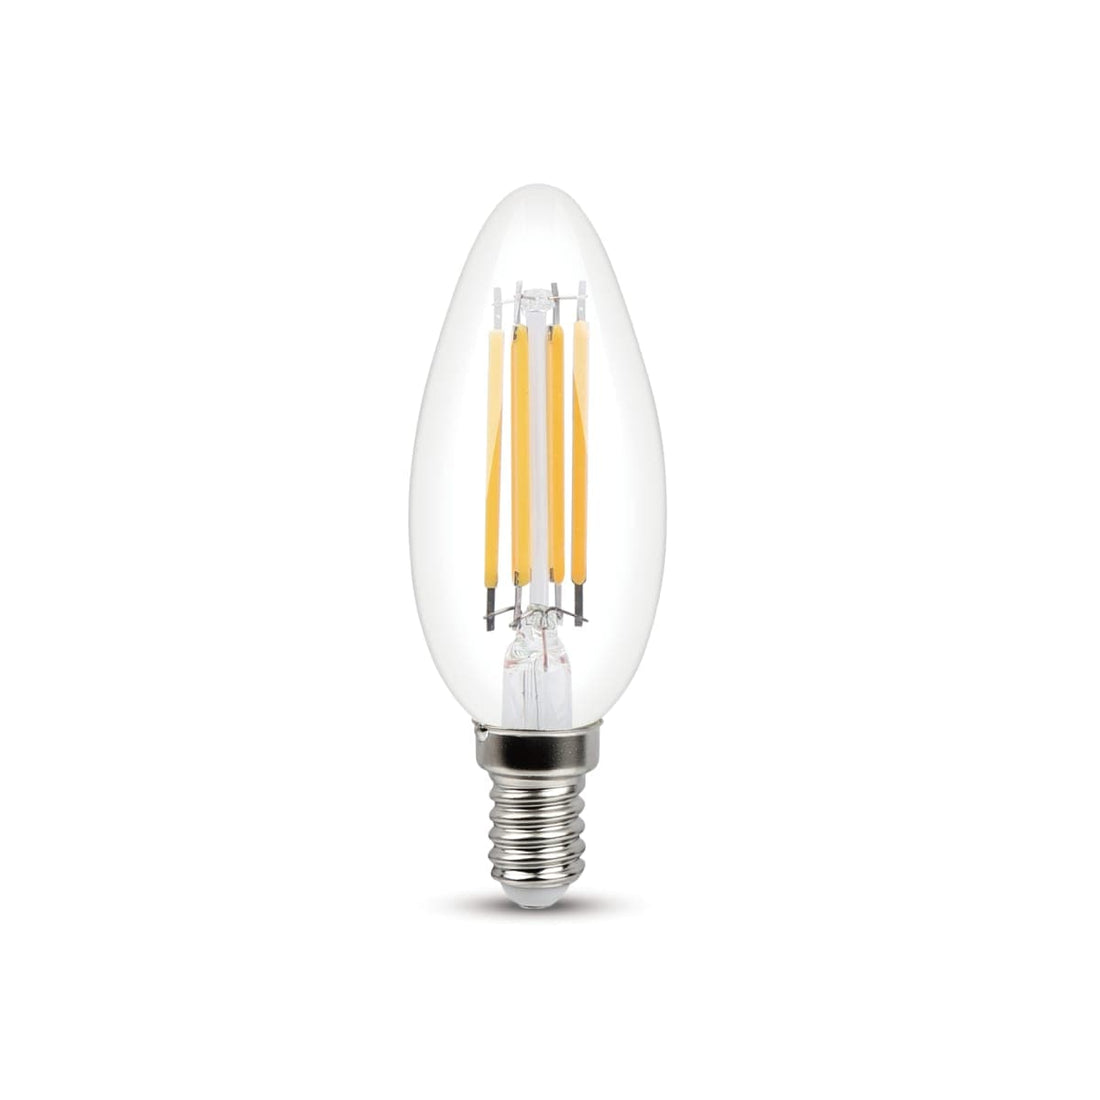 LED BULB E14=60W CANDLE CLEAR WARM LIGHT - best price from Maltashopper.com BR420007873